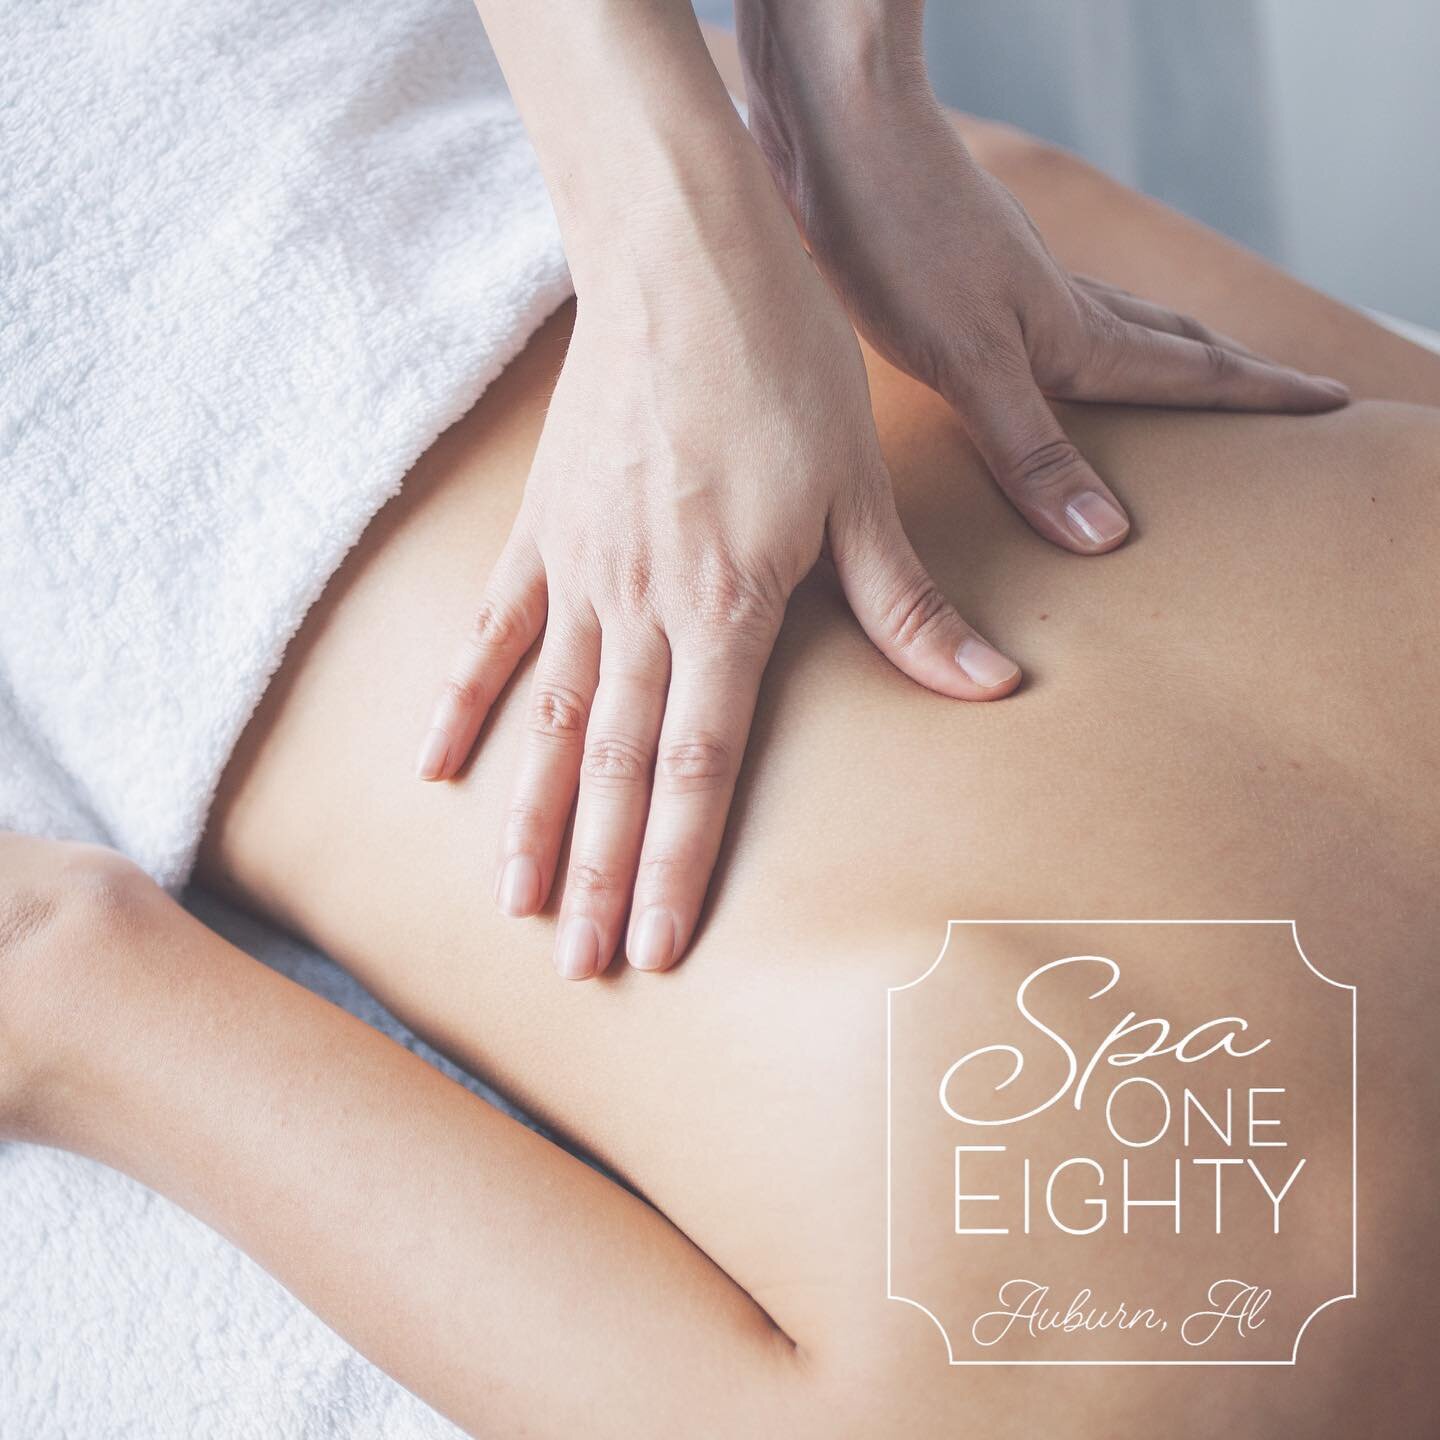 Happy Saturday, spa friends! We have a few *rare* Saturday Massage openings today if you&rsquo;d like to start your weekend off feeling your best! Book online at 180spa.com or give us a call to schedule! 334-887-1180 #Massage #MassageTherapy #LMT #Sp